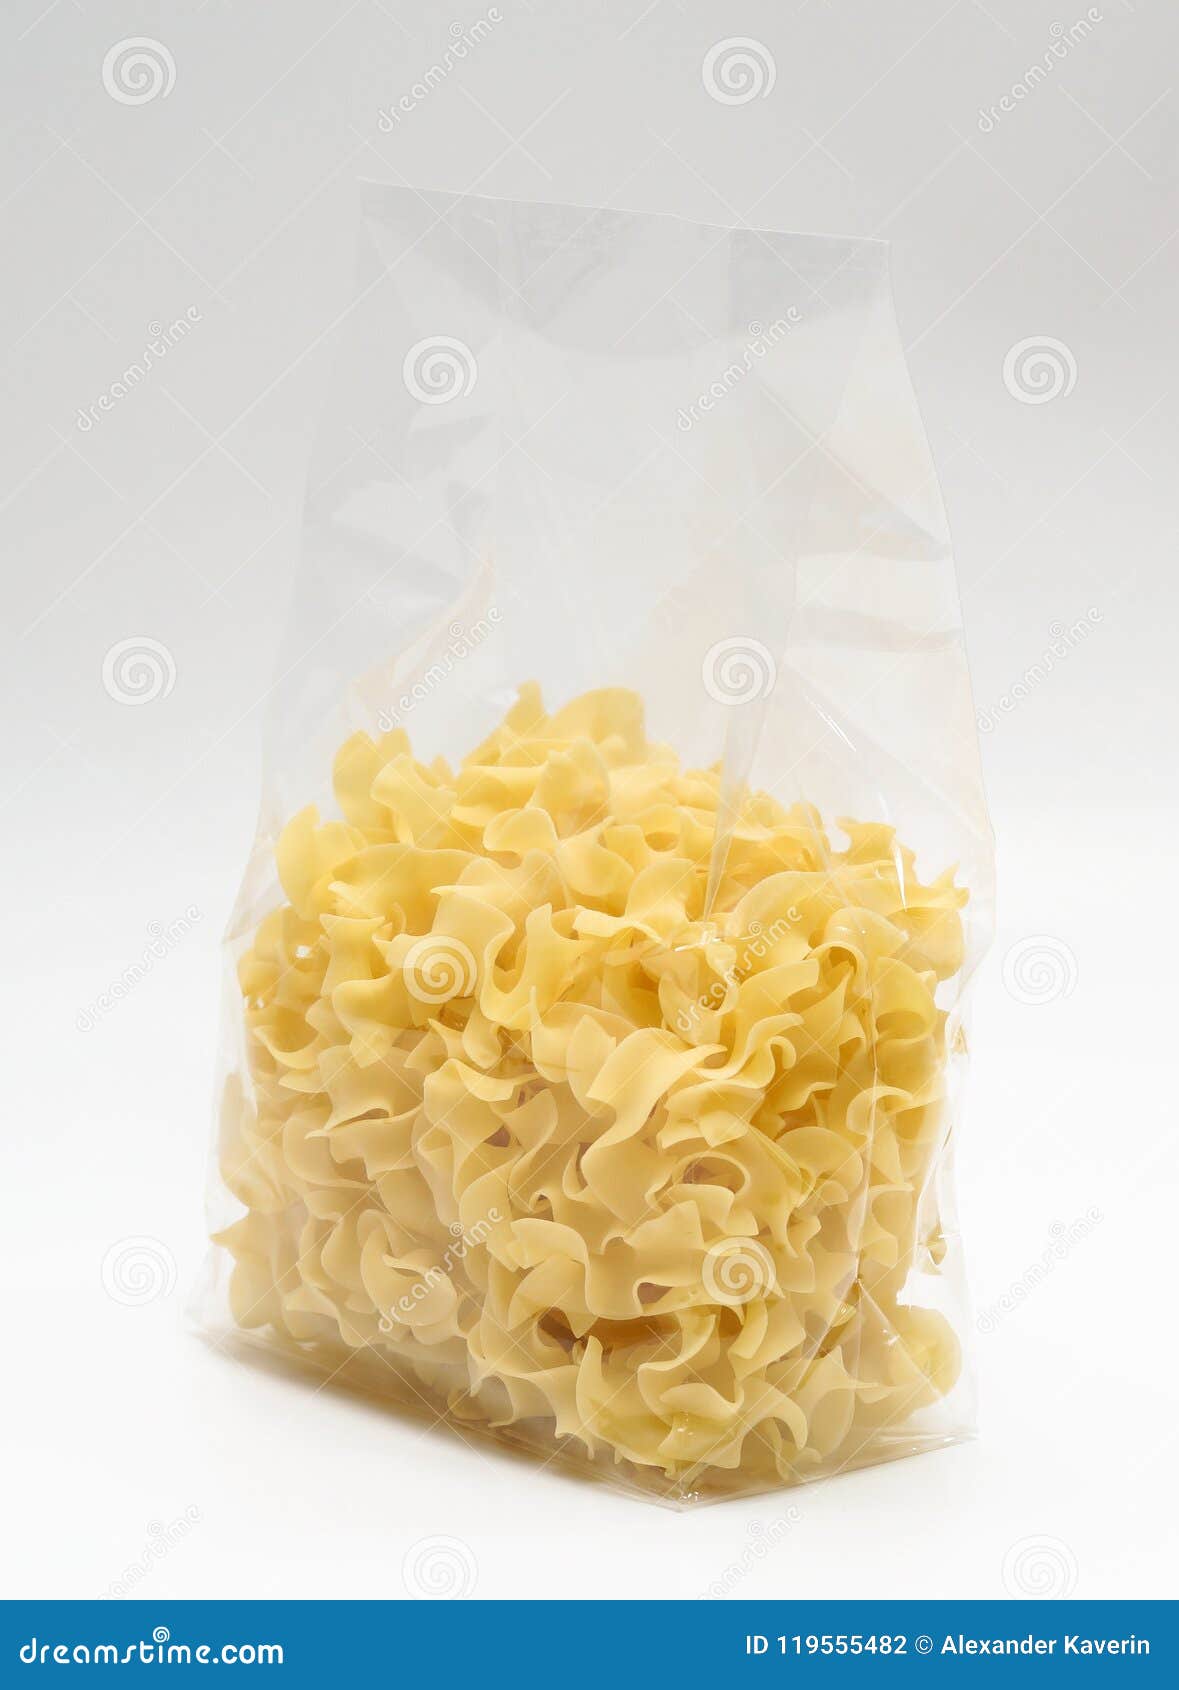 Download 189 Pasta Bag Transparent Photos Free Royalty Free Stock Photos From Dreamstime Yellowimages Mockups